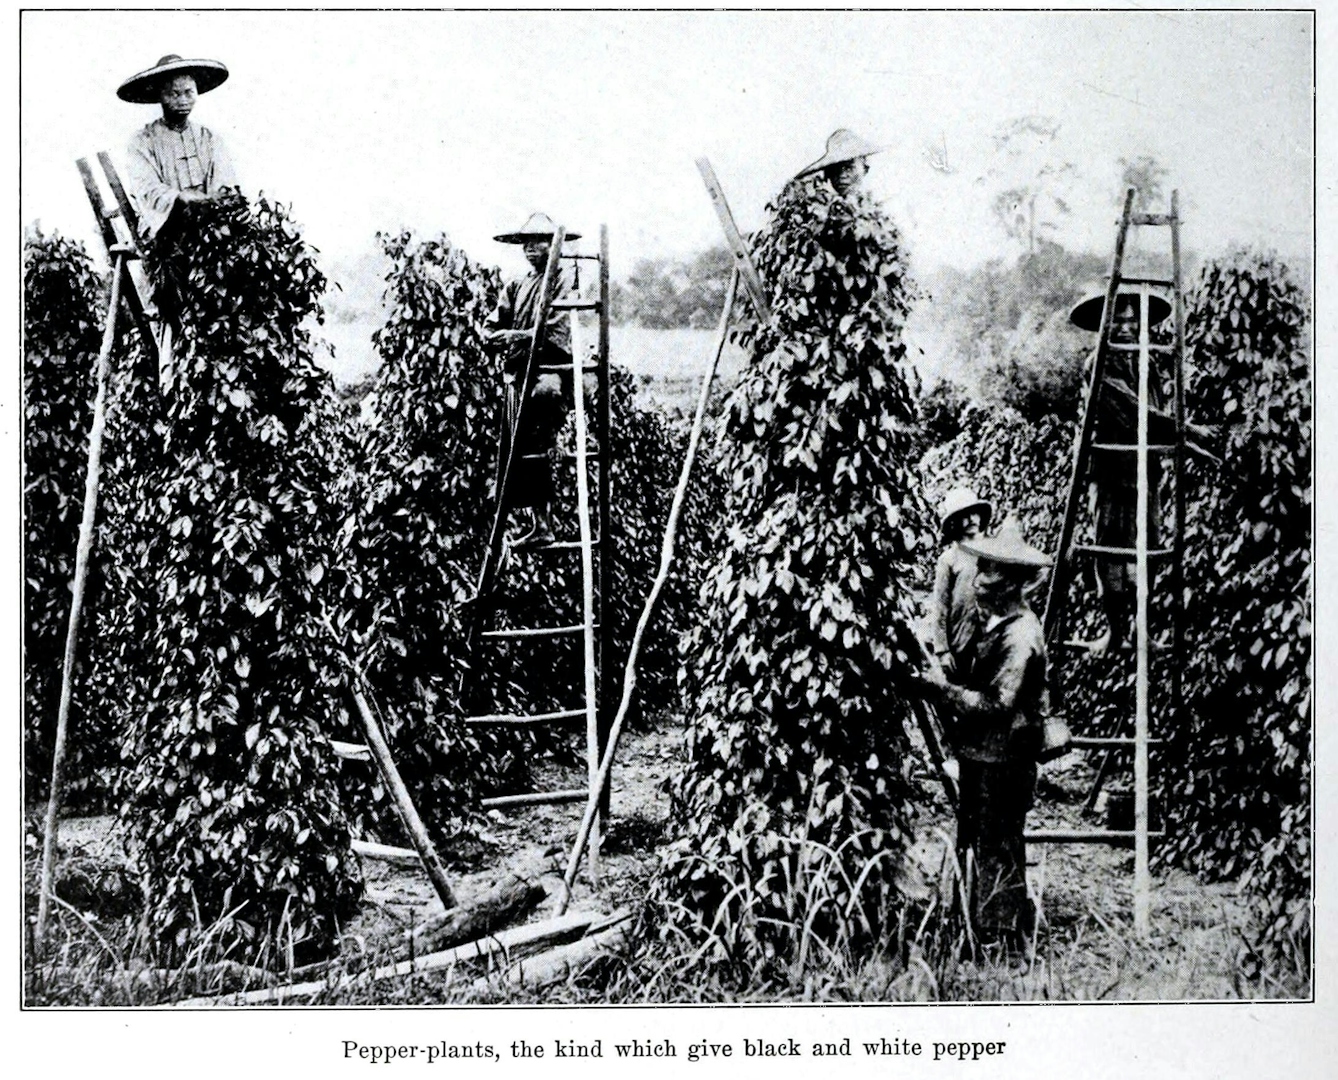 A black and white photograph of workers harvesting black pepper.